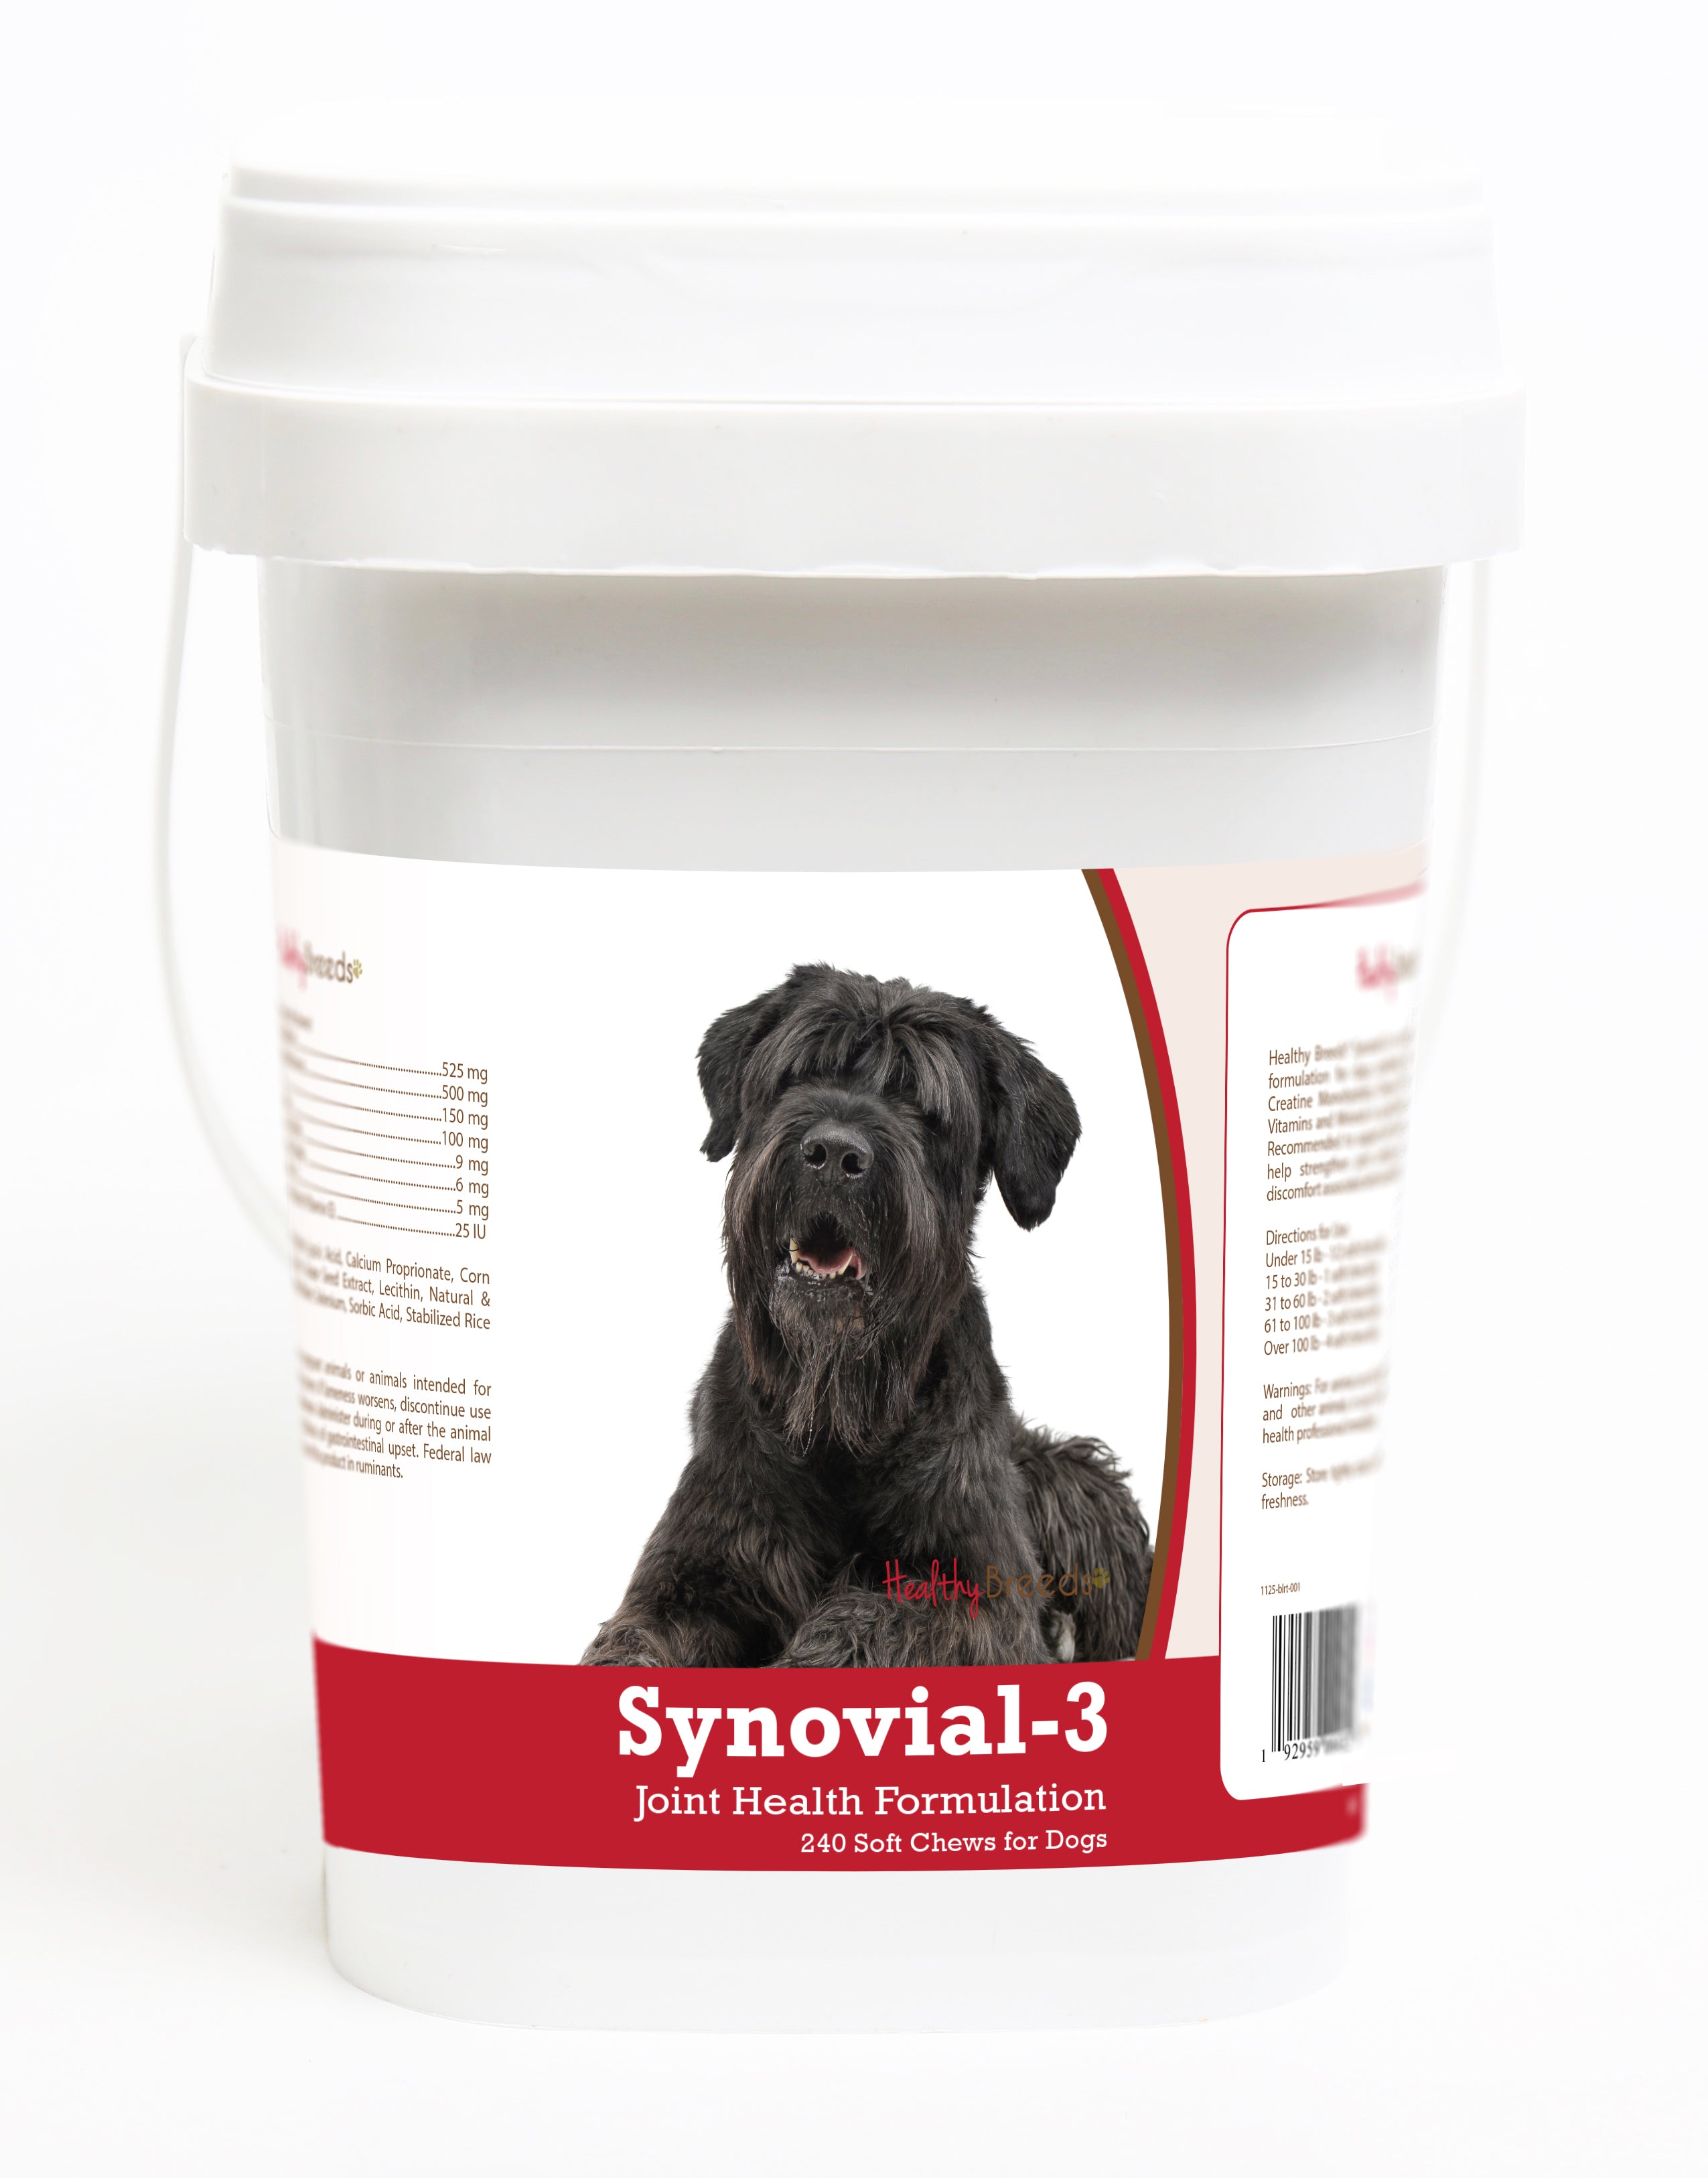 Black Russian Terrier Synovial-3 Joint Health Formulation Soft Chews 240 Count